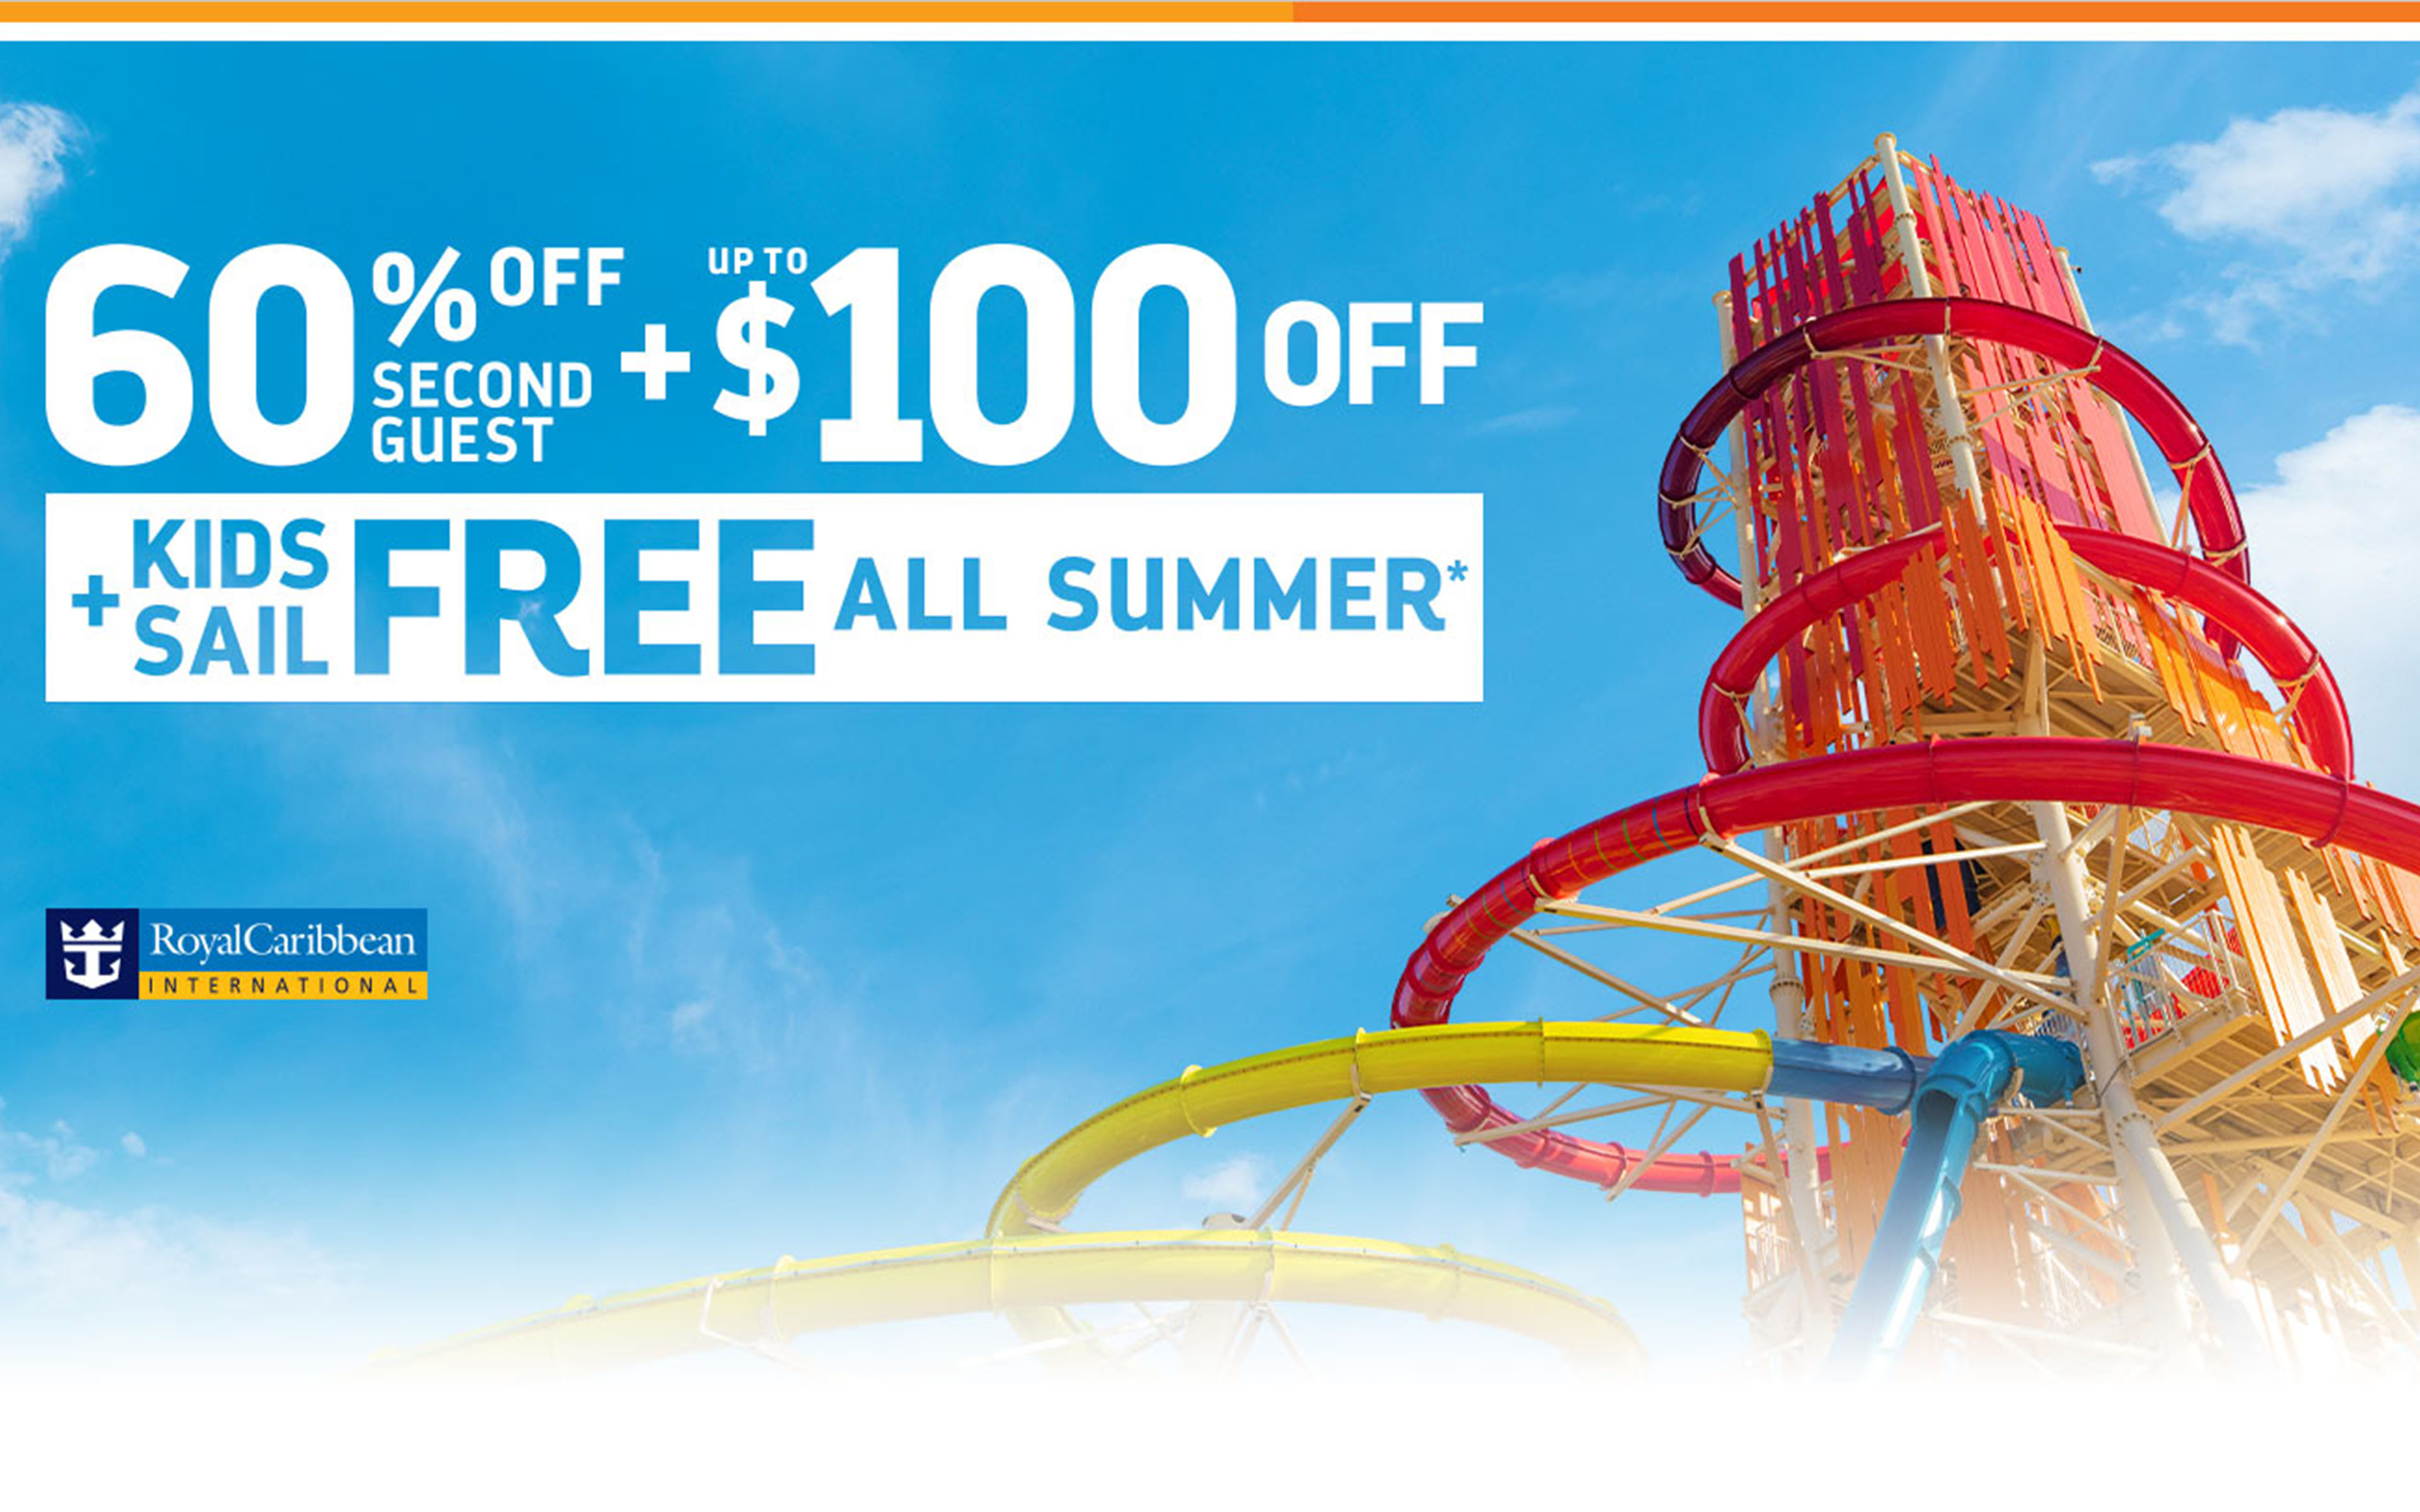 Royal Caribbean - 60% OFF Second Guest + Kids Sail Free + Up to $100 OFF